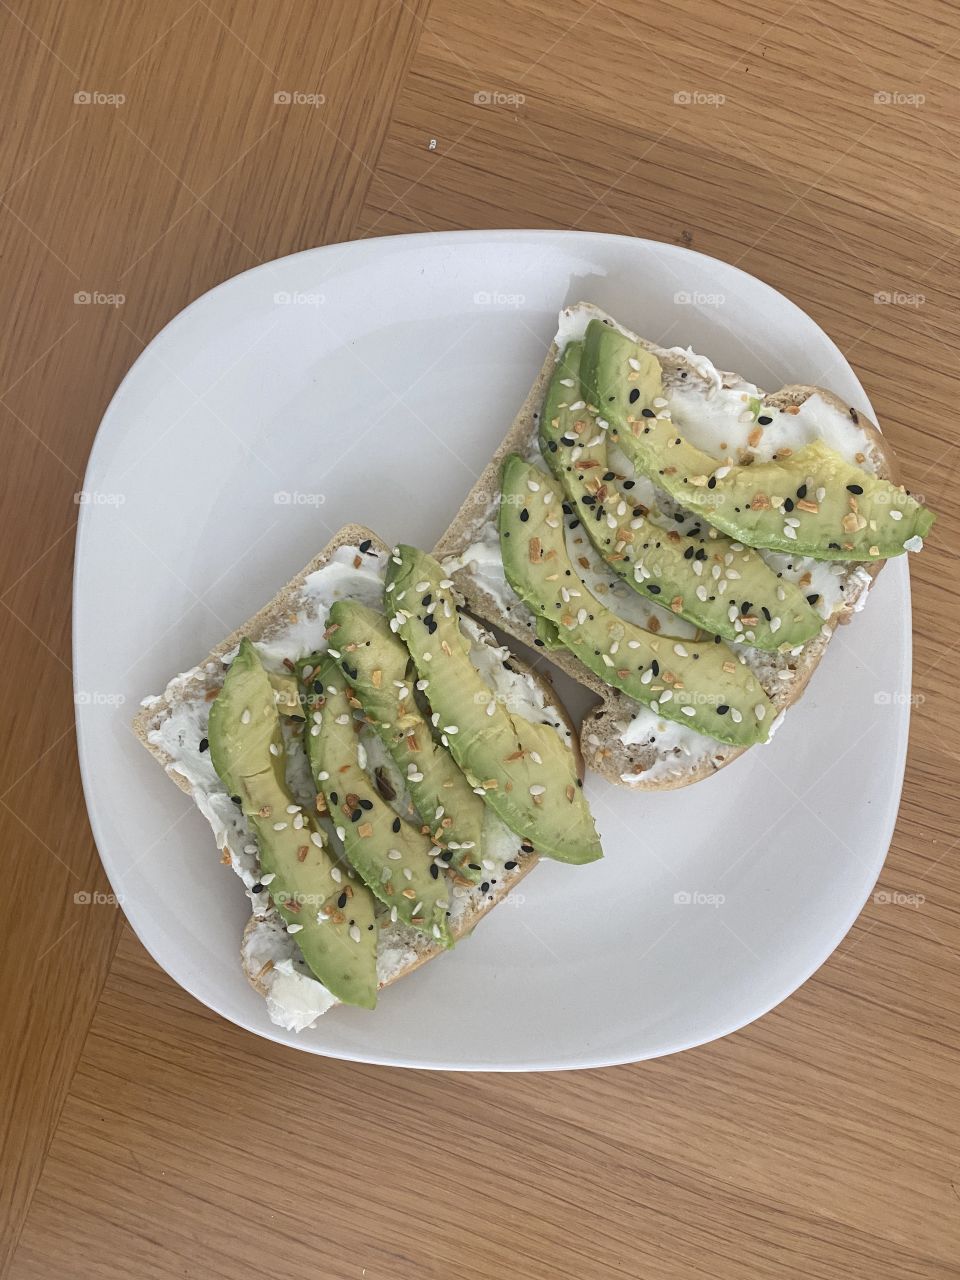 Avocado, cream cheese,and everything but the bagel seasoning on keto friendly bread. Simple fuel for the day.